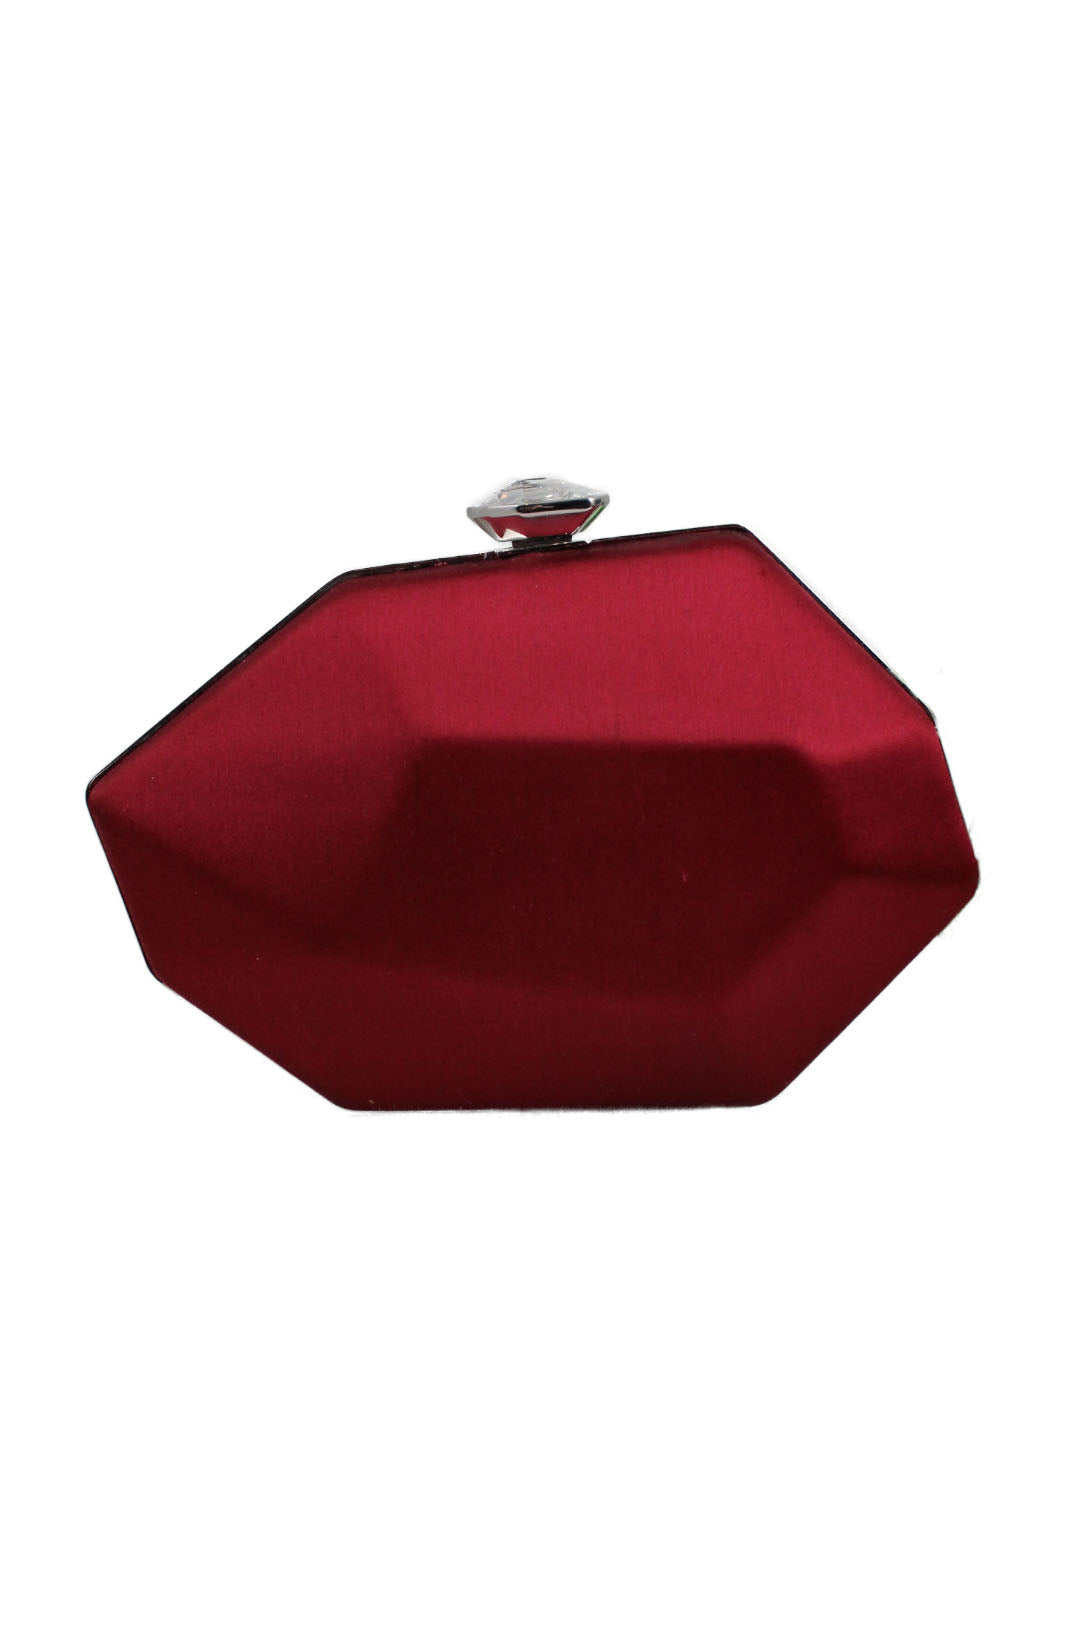 atelier swarvoski ss19 clutch. features asymmetrical geometric silhouette with red satin. silver trim and internal black fabric lining with small pocket. rhinestone on top acts as a closure release.